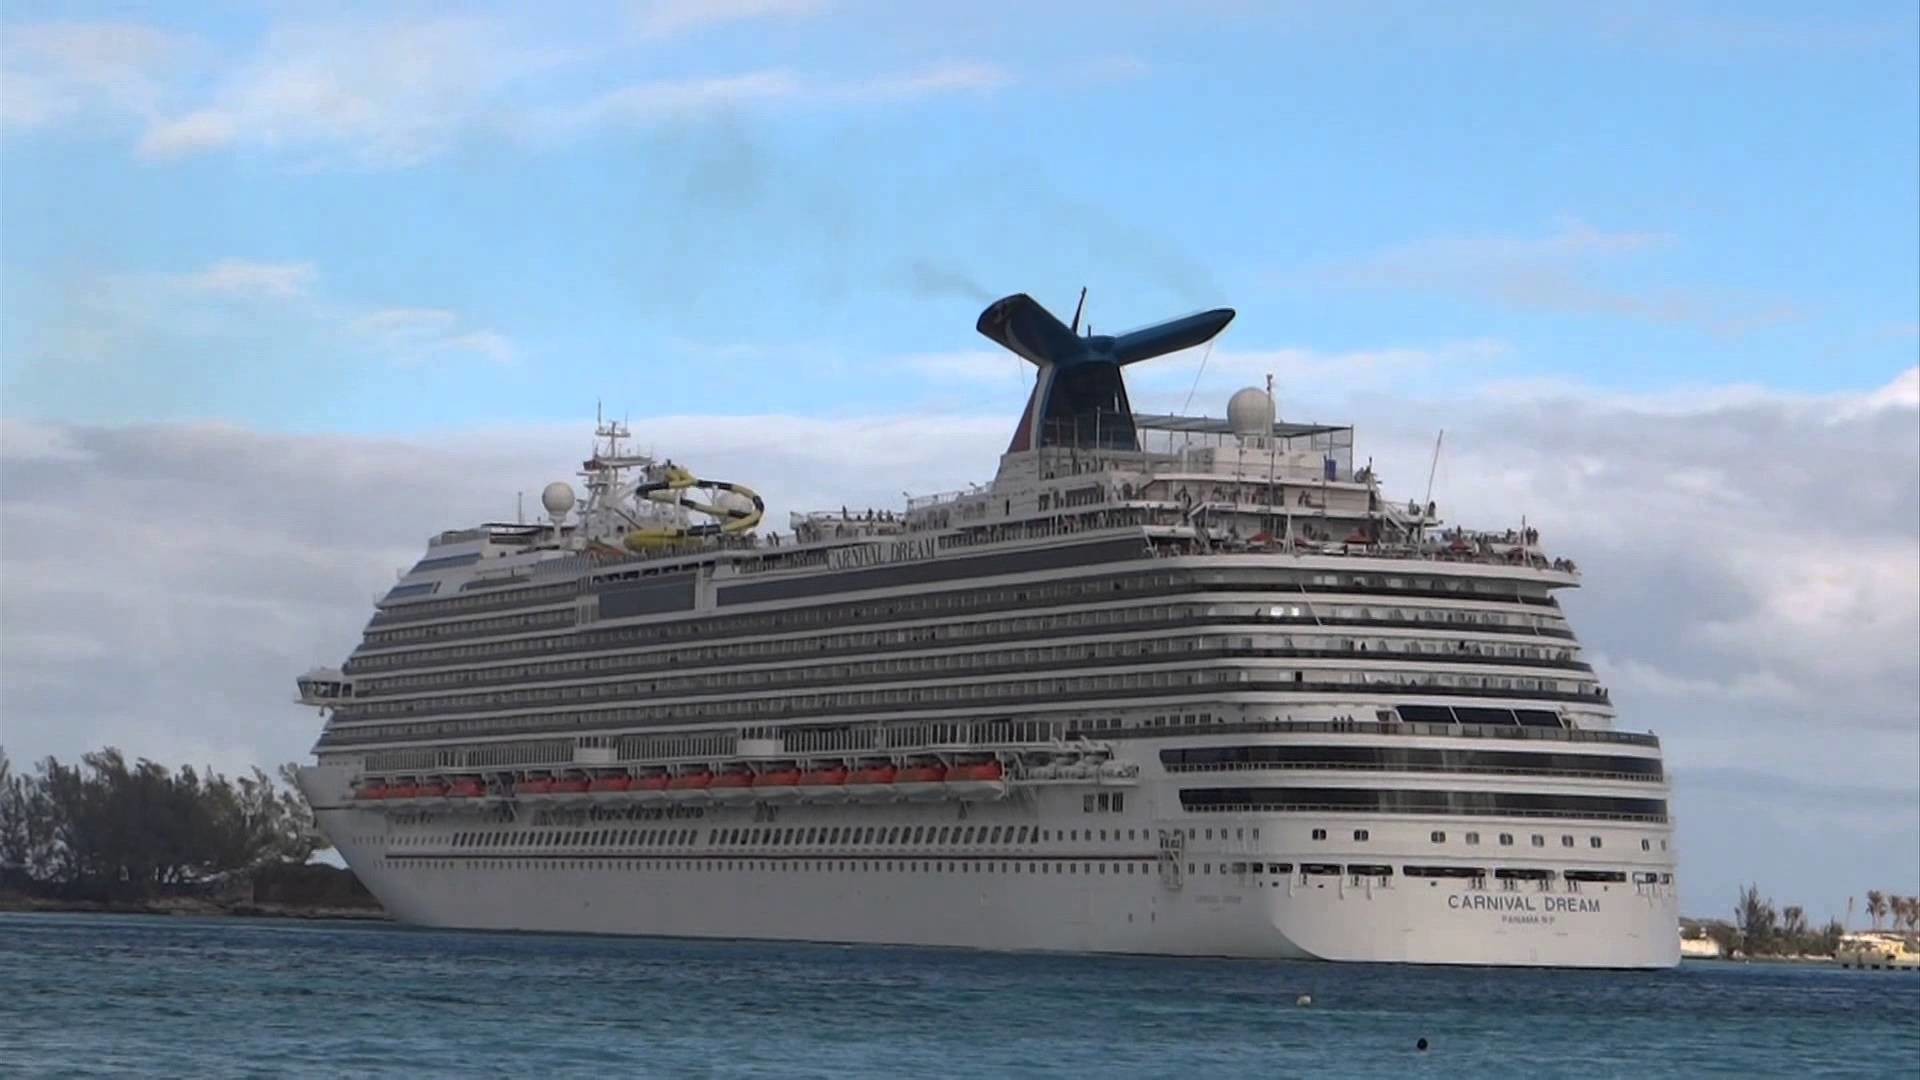 1920x1080 Nassau, The Bahamas - Oasis of the Seas and Carnival Dream Departure HD  (2012) - YouTube